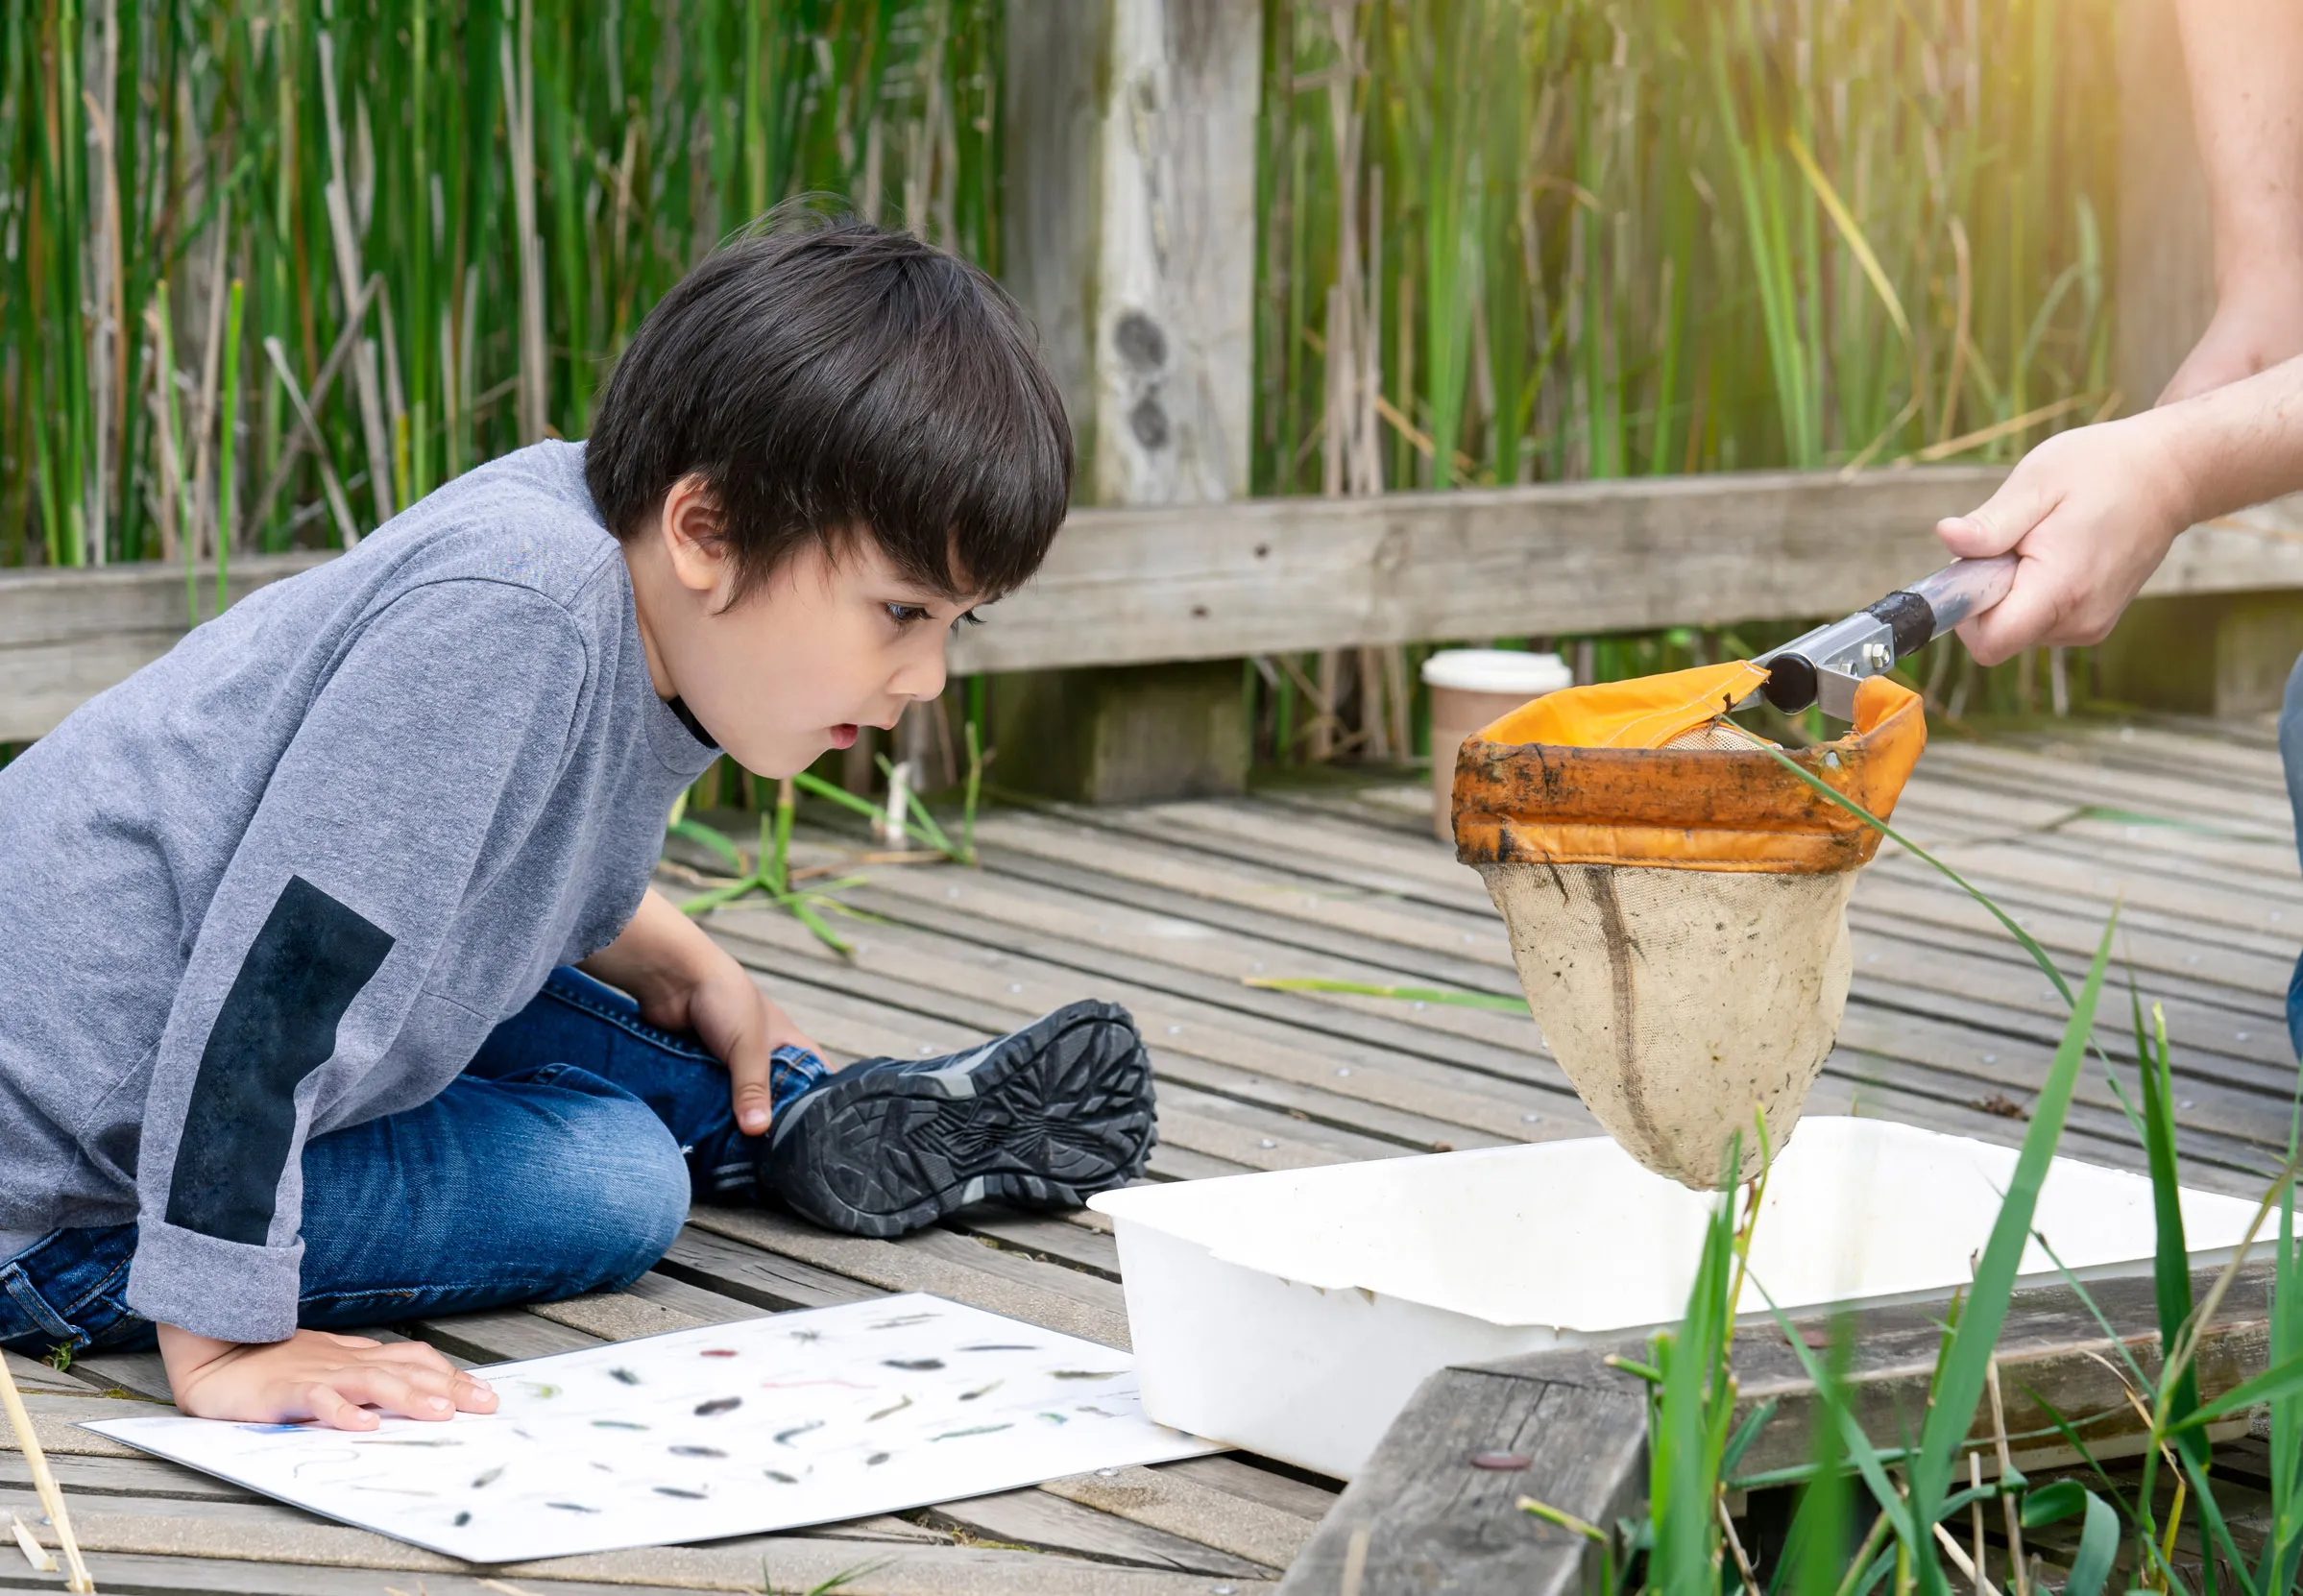 A child investigating the contents of a pond dipping net.